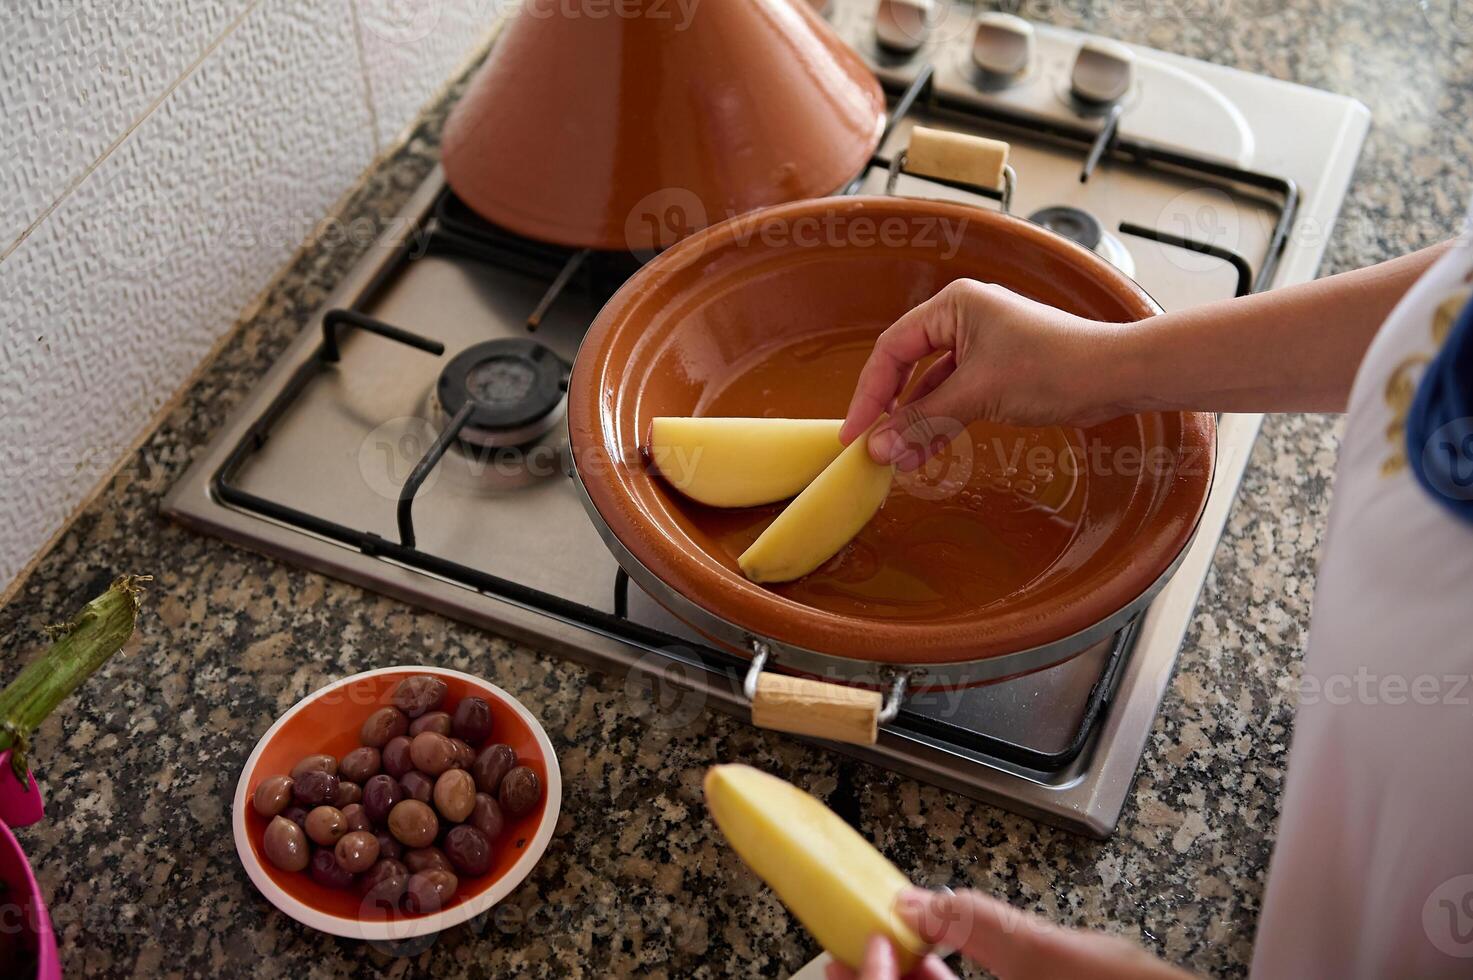 Top view of a housewife cooking tajine, putting slices of organic potato inside a clay dish. Moroccan traditional food photo